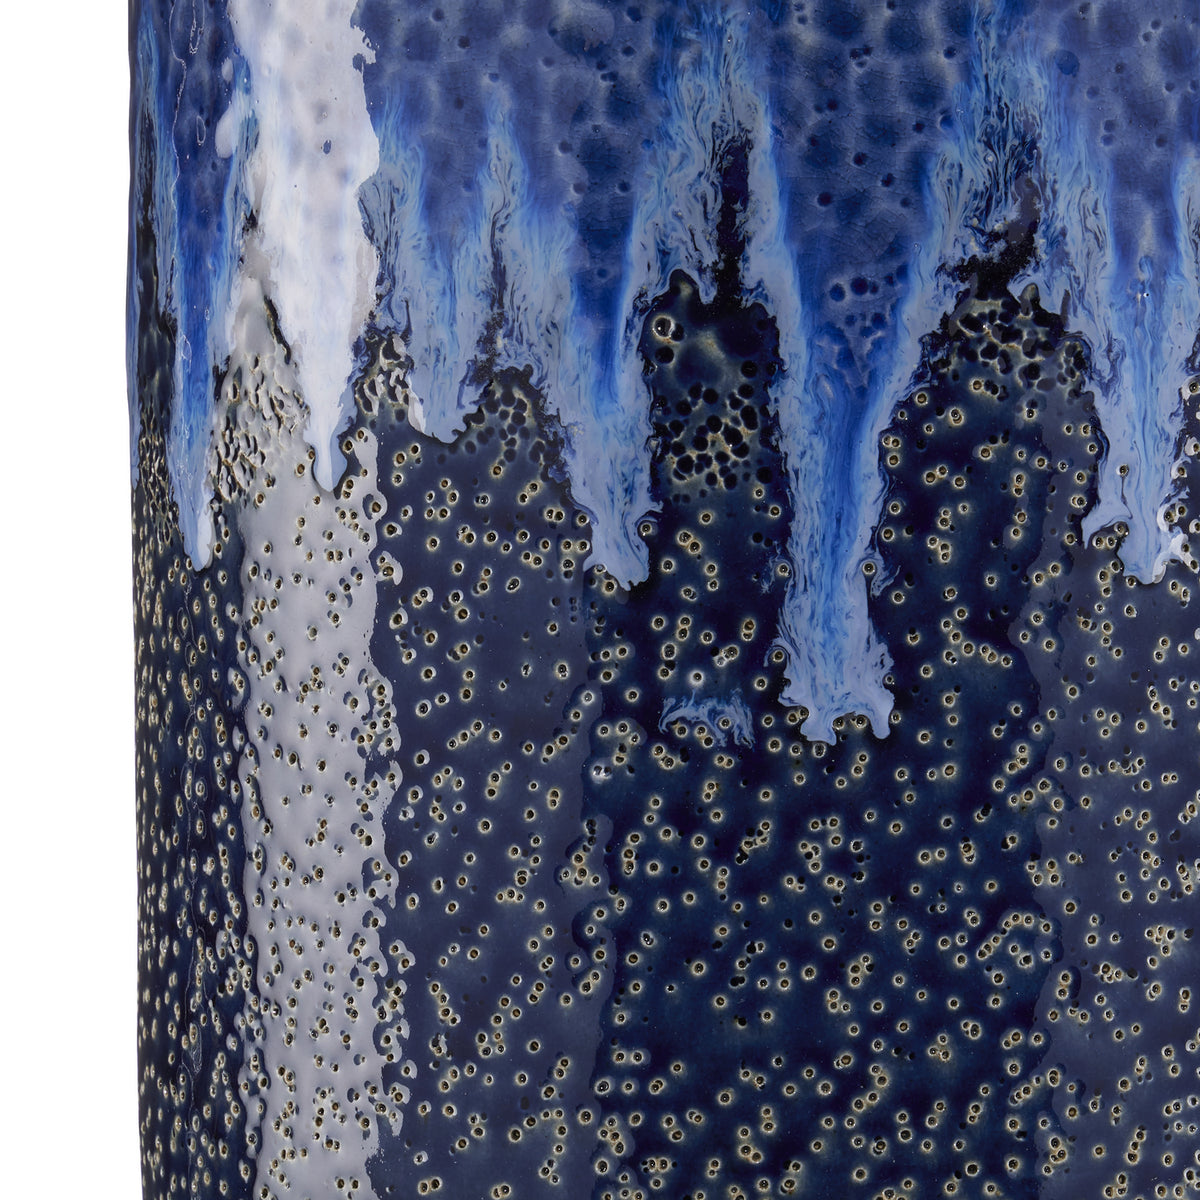 Currey and Company Cachepot from the Kelmscott collection in Dark Blue/Reactive Blue finish